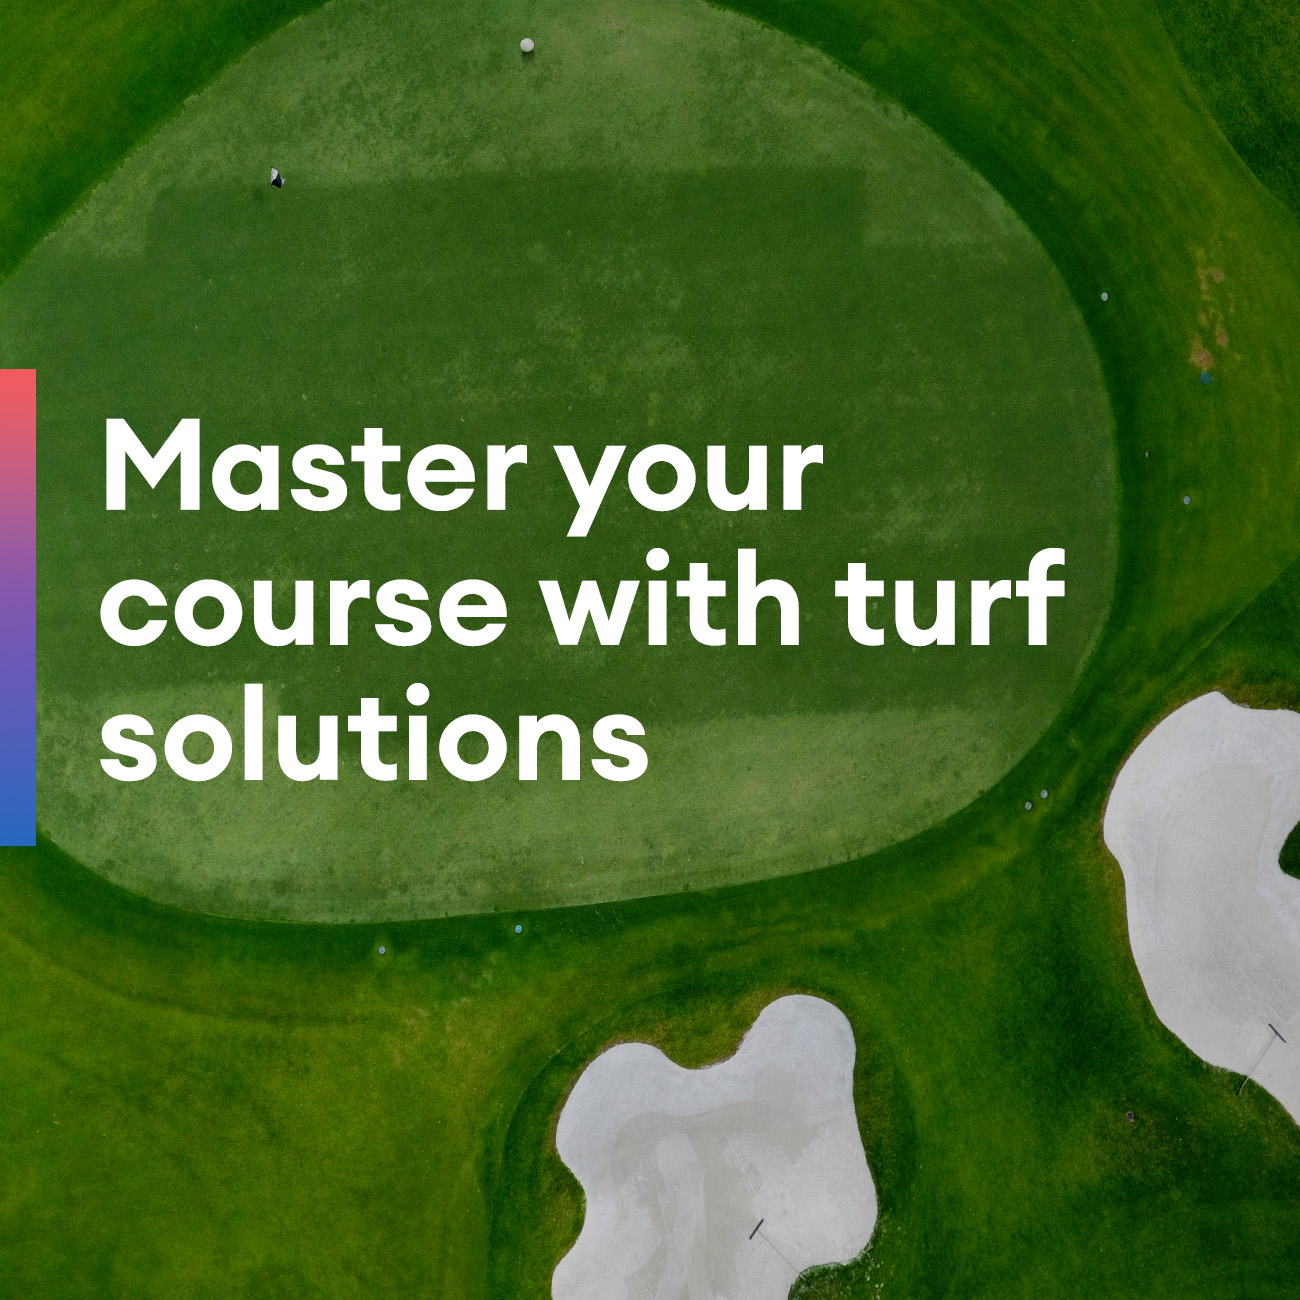 text Master your course with turf solutions image golf course turf from above